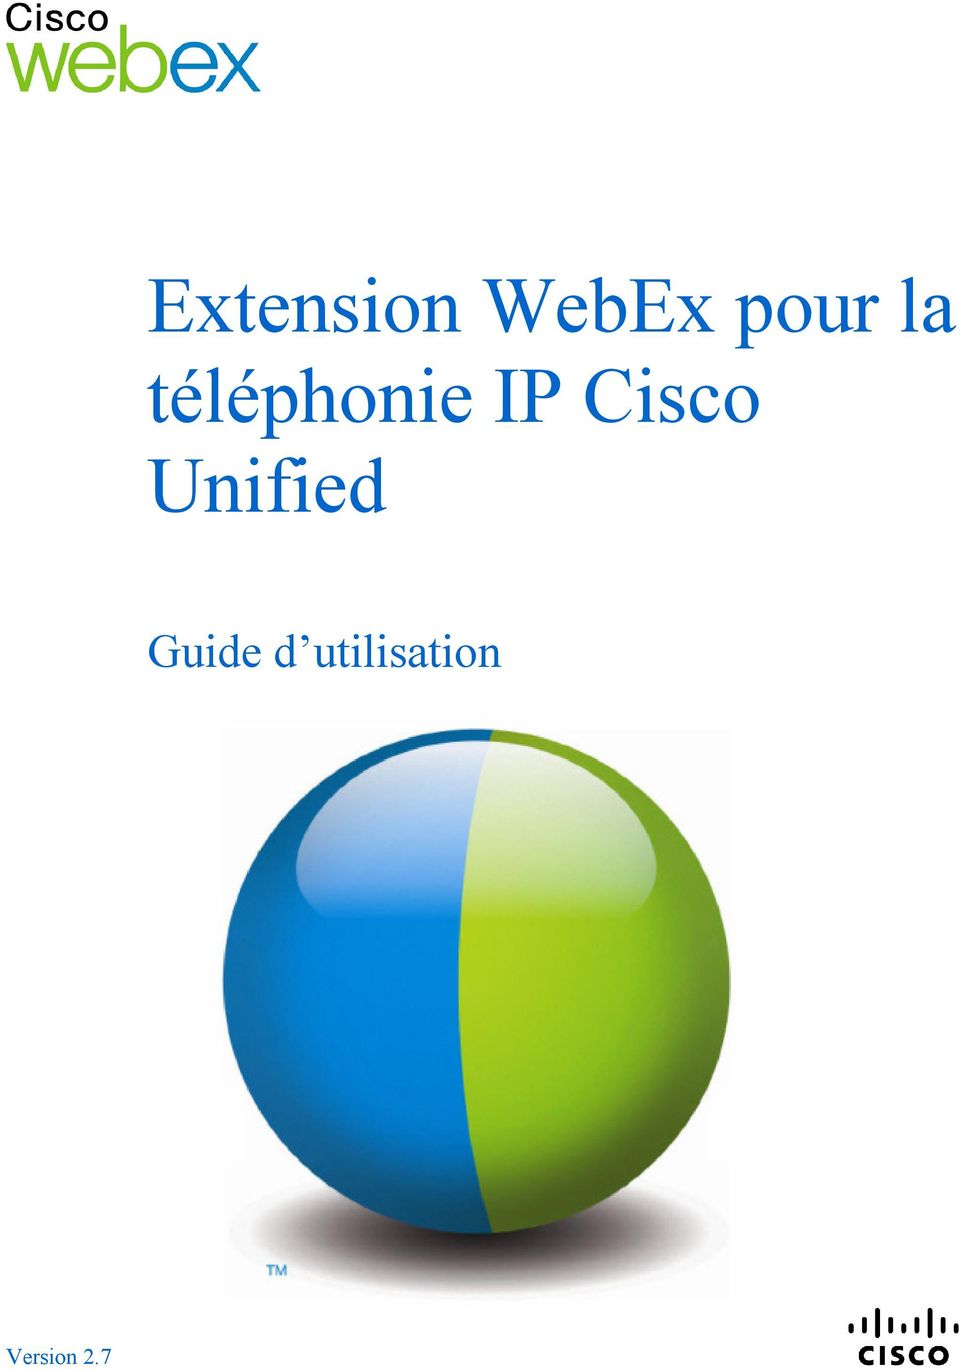 Cisco Unified Guide